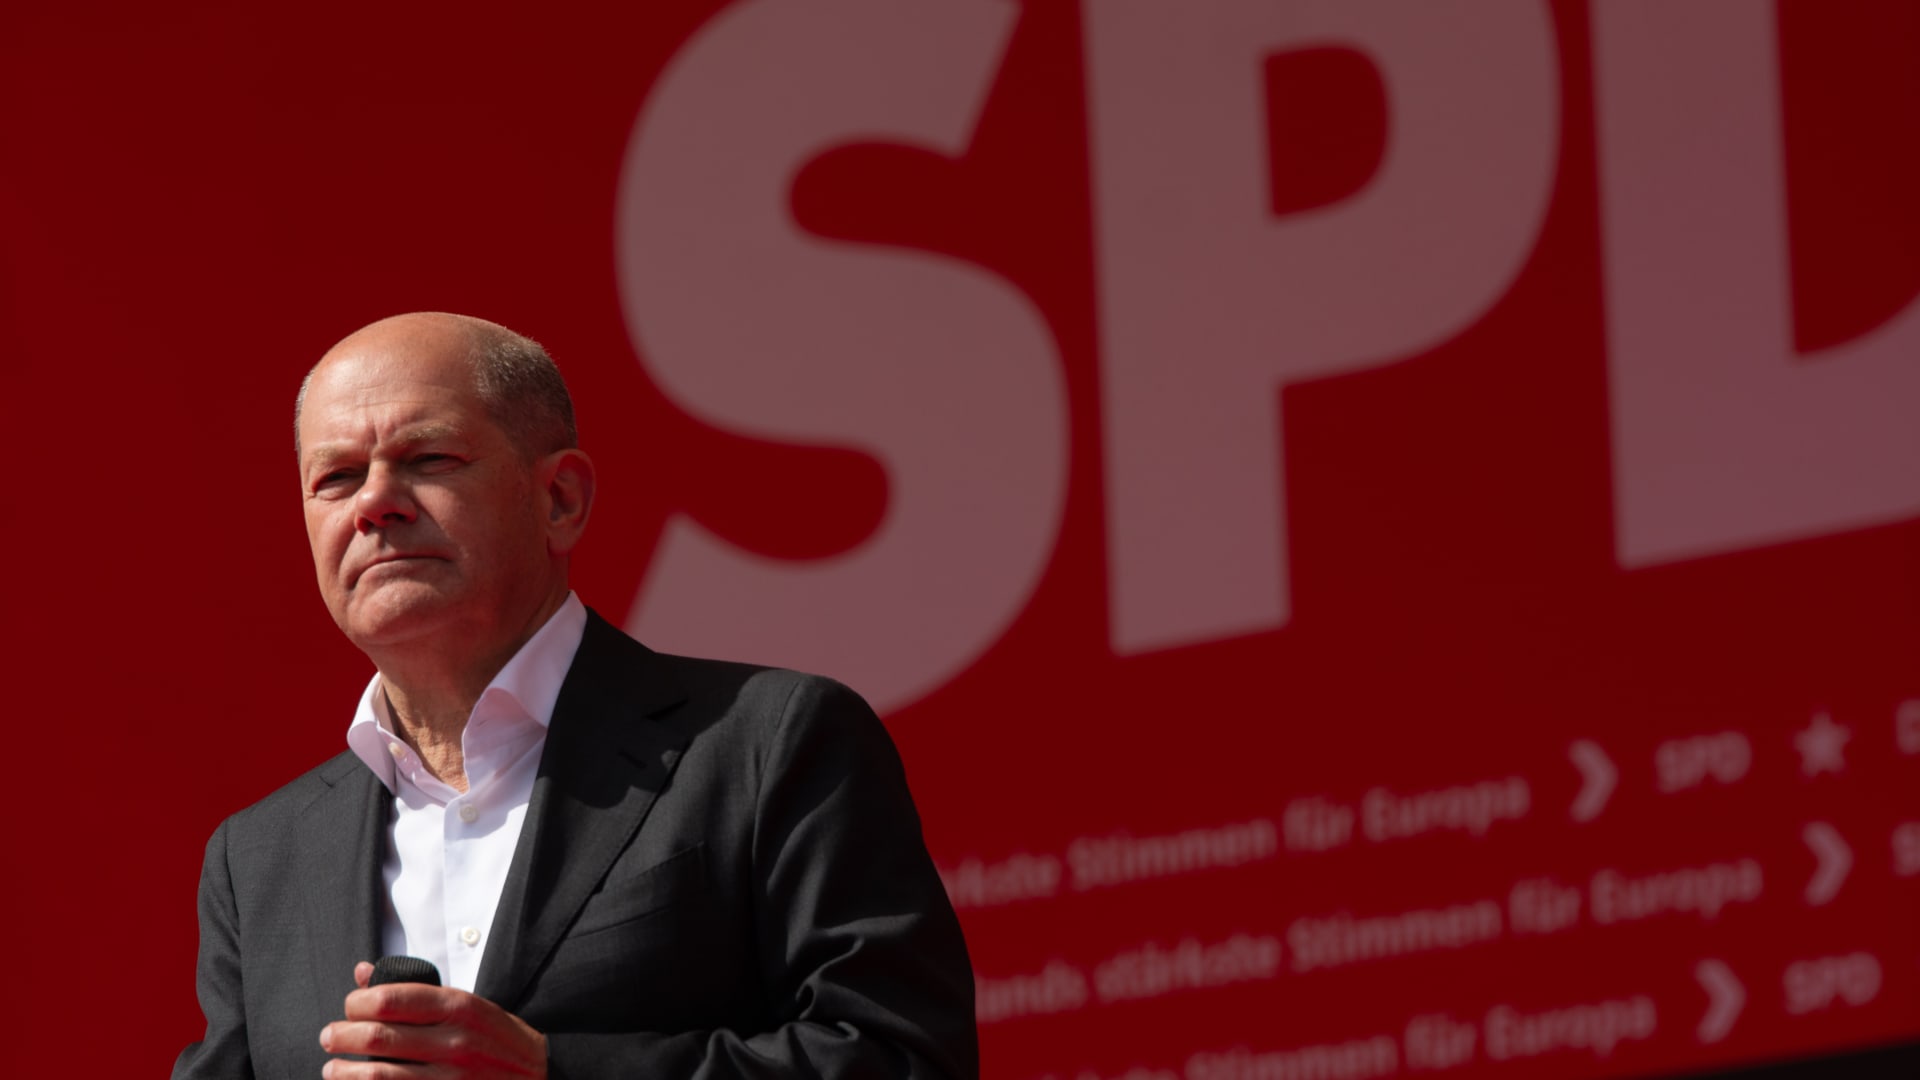 The pressure on the German Scholz is increasing after election abuse by the extreme right